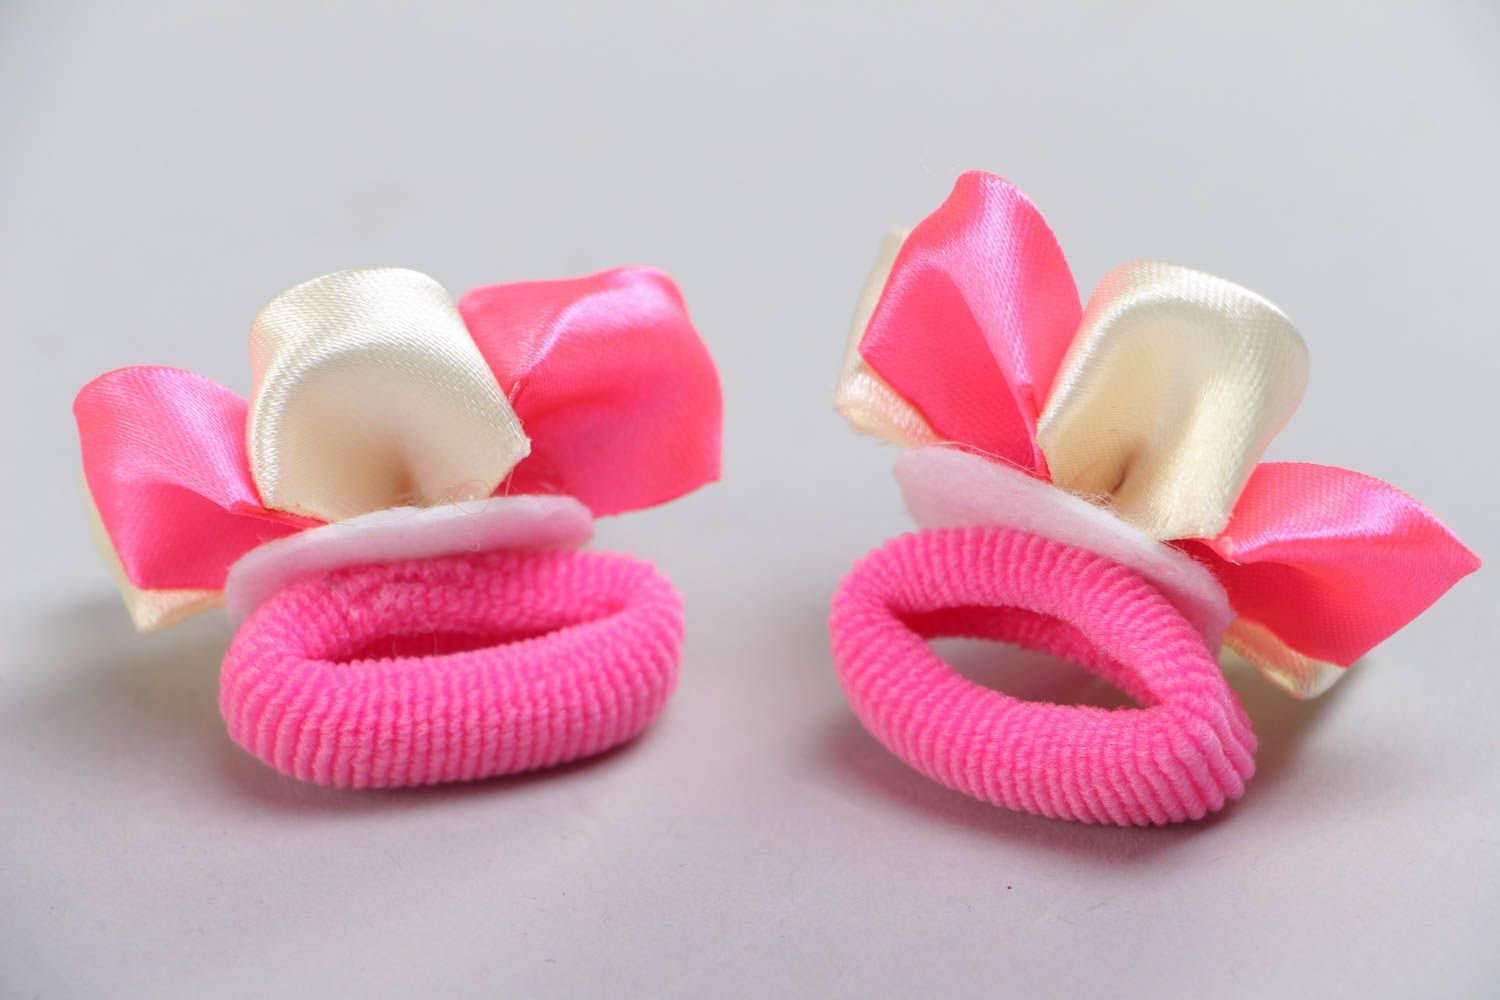 Handmade decorative hair ties with pink kanzashi flowers for kids set of 2 items photo 4